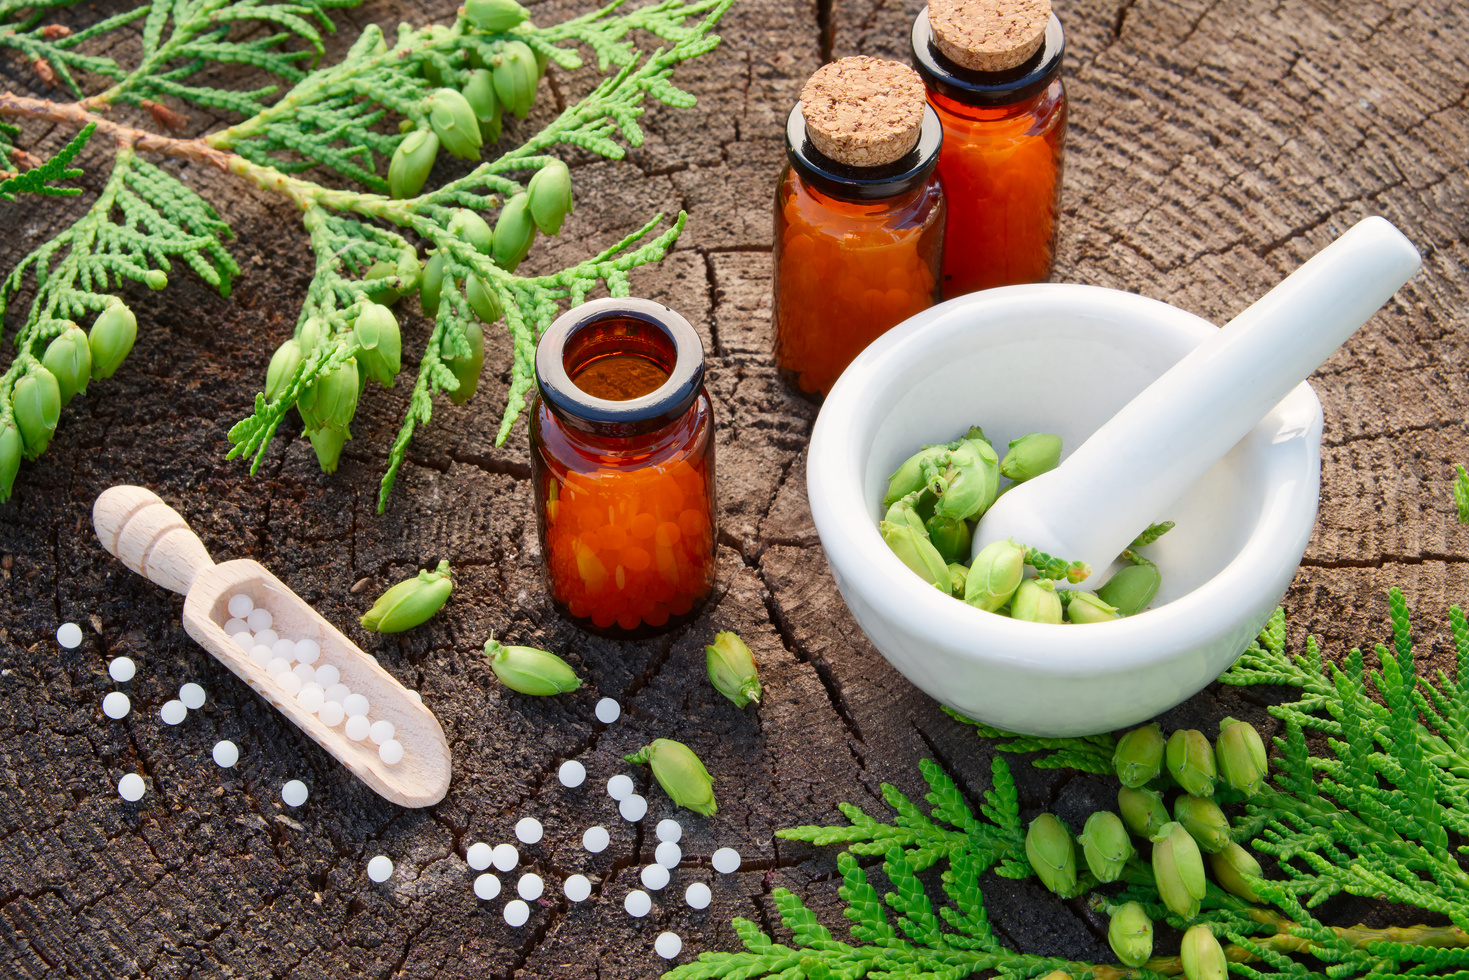 Bottles of homeopathic globules, Thuja occidentalis drugs, mortar and pestle. Homeopathy medicine concept.